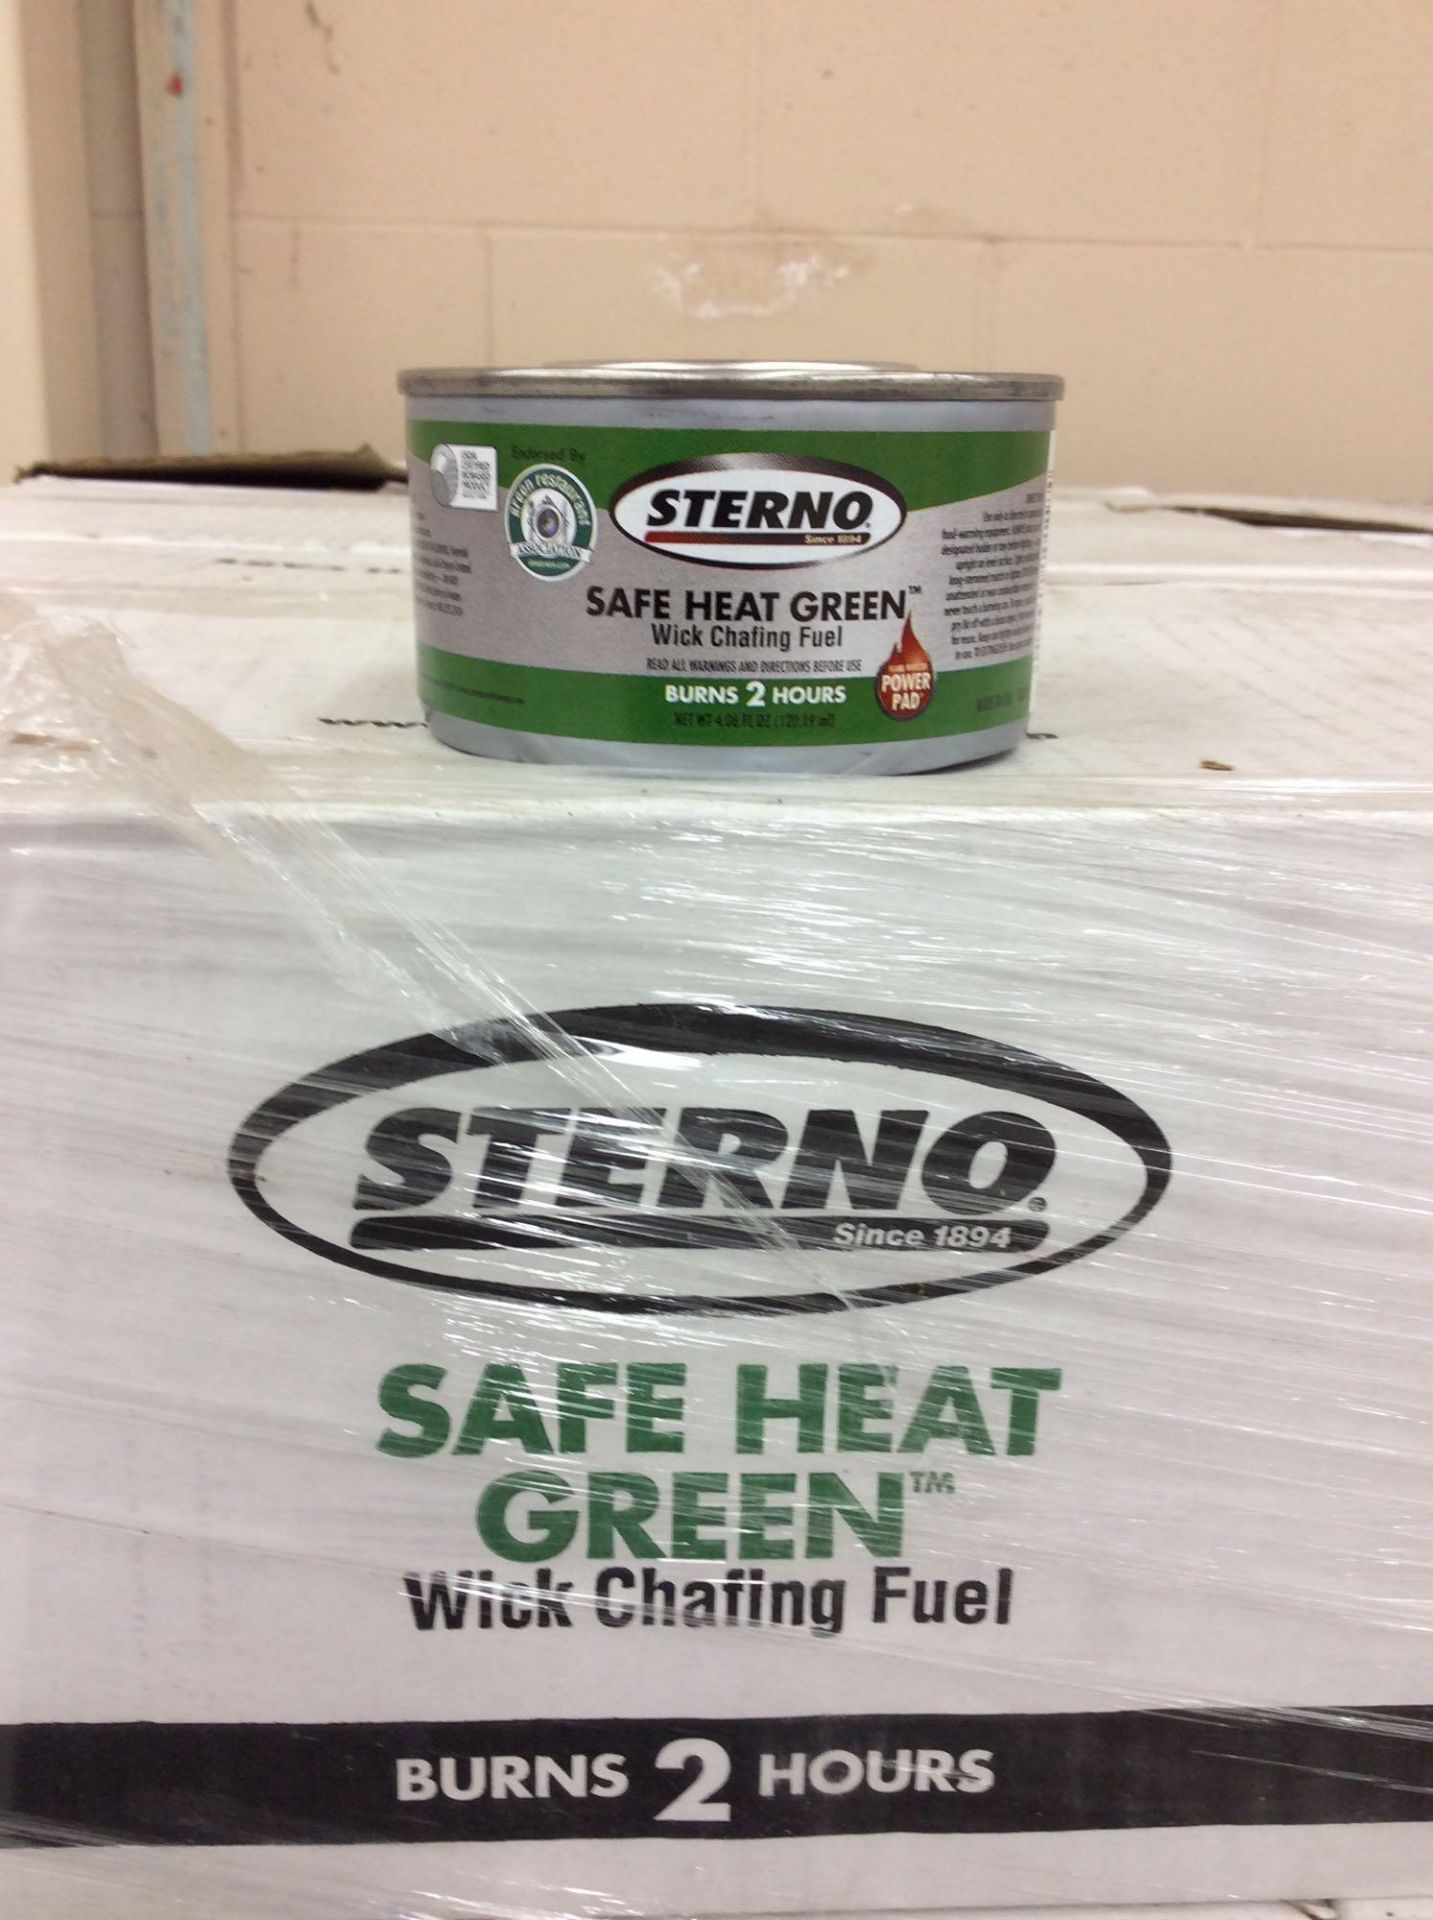 Lot of (35) cases of Sterno Safe Green Heat Wick Chafing Fuel, 2-hr, 4.06-oz, (72) cans per case